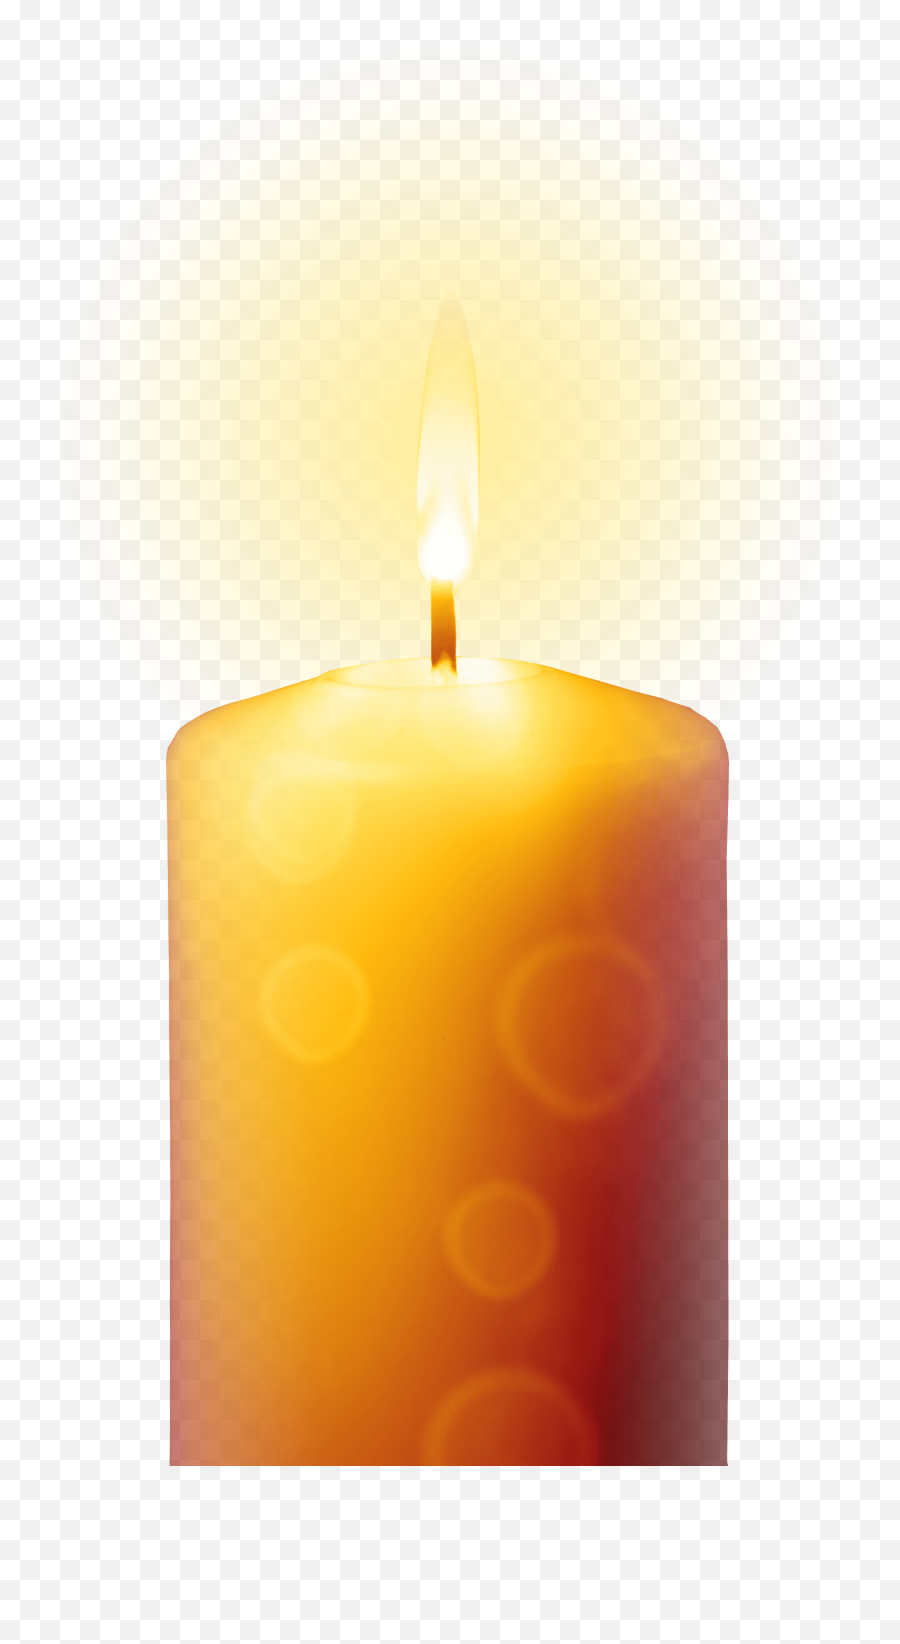 Download Hd Png Images Of Light Full Maps Locations - Rest In Peace Candle Png,Candle Transparent Png